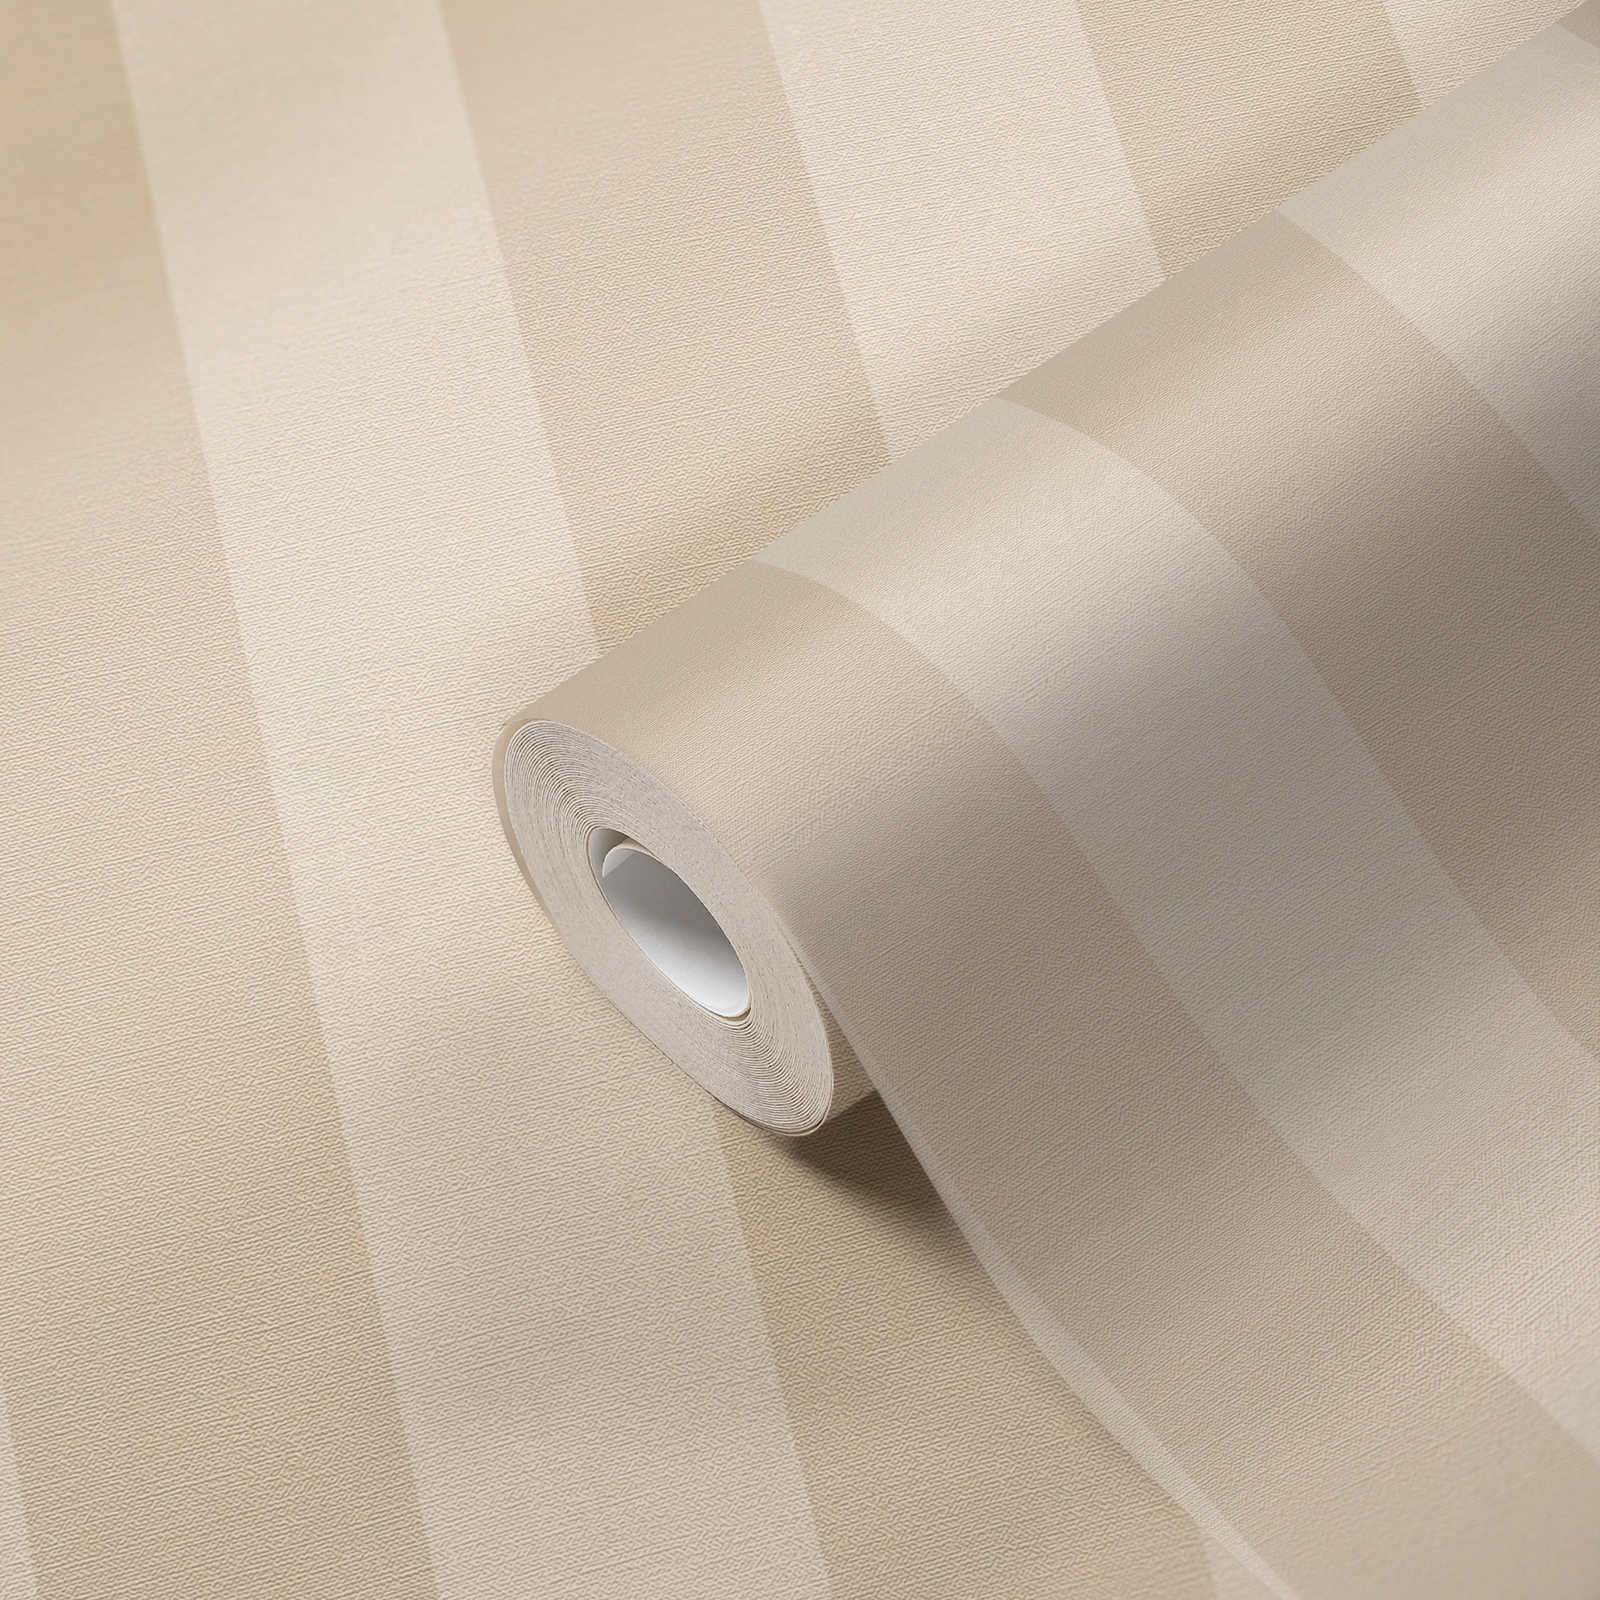             Non-woven wallpaper with stripes and linen look PVC-free - beige, white
        